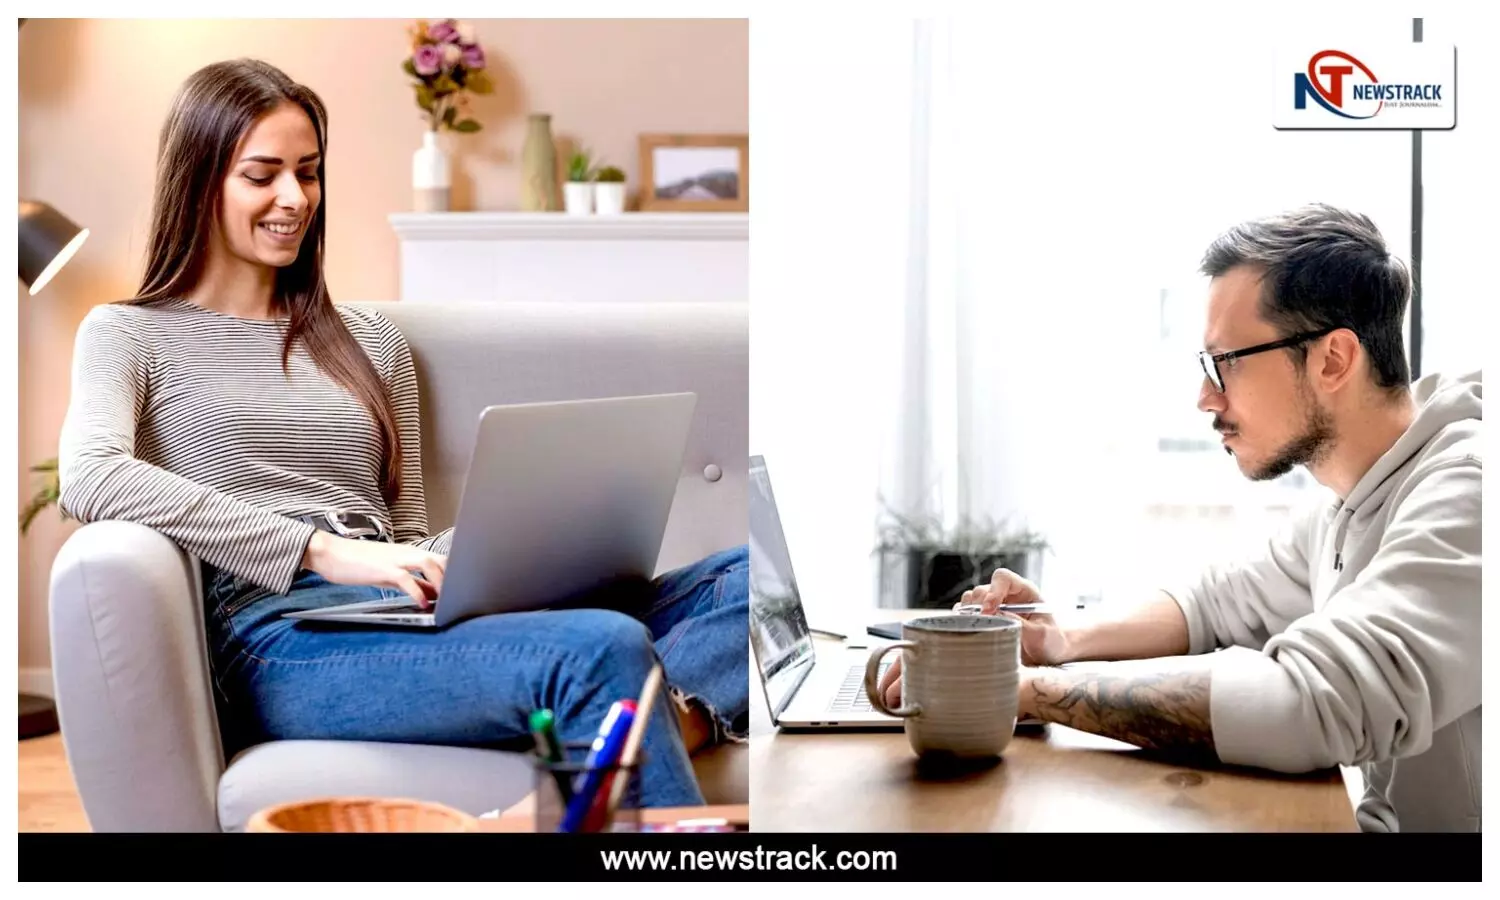 Work from home postures